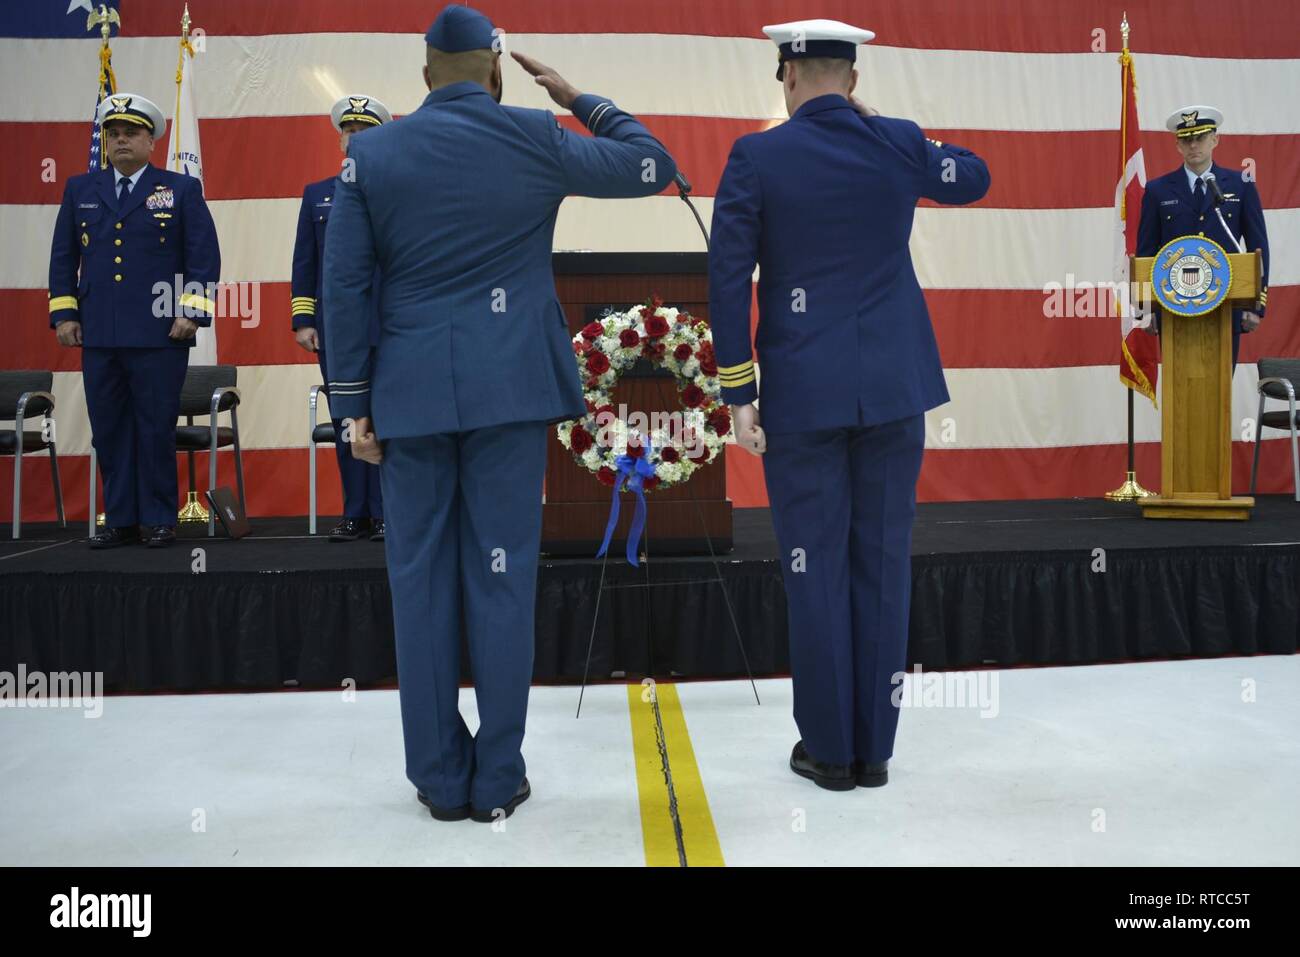 U.S. Coast Guard Lt. Cmdr. John Filipowicz and Royal Canadian Air Force Capt. Pete Wright salute the memorial wreath honoring the 40th anniversary of the crew of Aircraft 1432 who gave the ultimate sacrifice, Wednesday, Feb. 13, 2019, Cape Cod, Massachusetts. Both pilots, one crewmember, and a corpsman lost their lives in the accident, while the flight mechanic survived and was rescued by the fishing vessel. Stock Photo